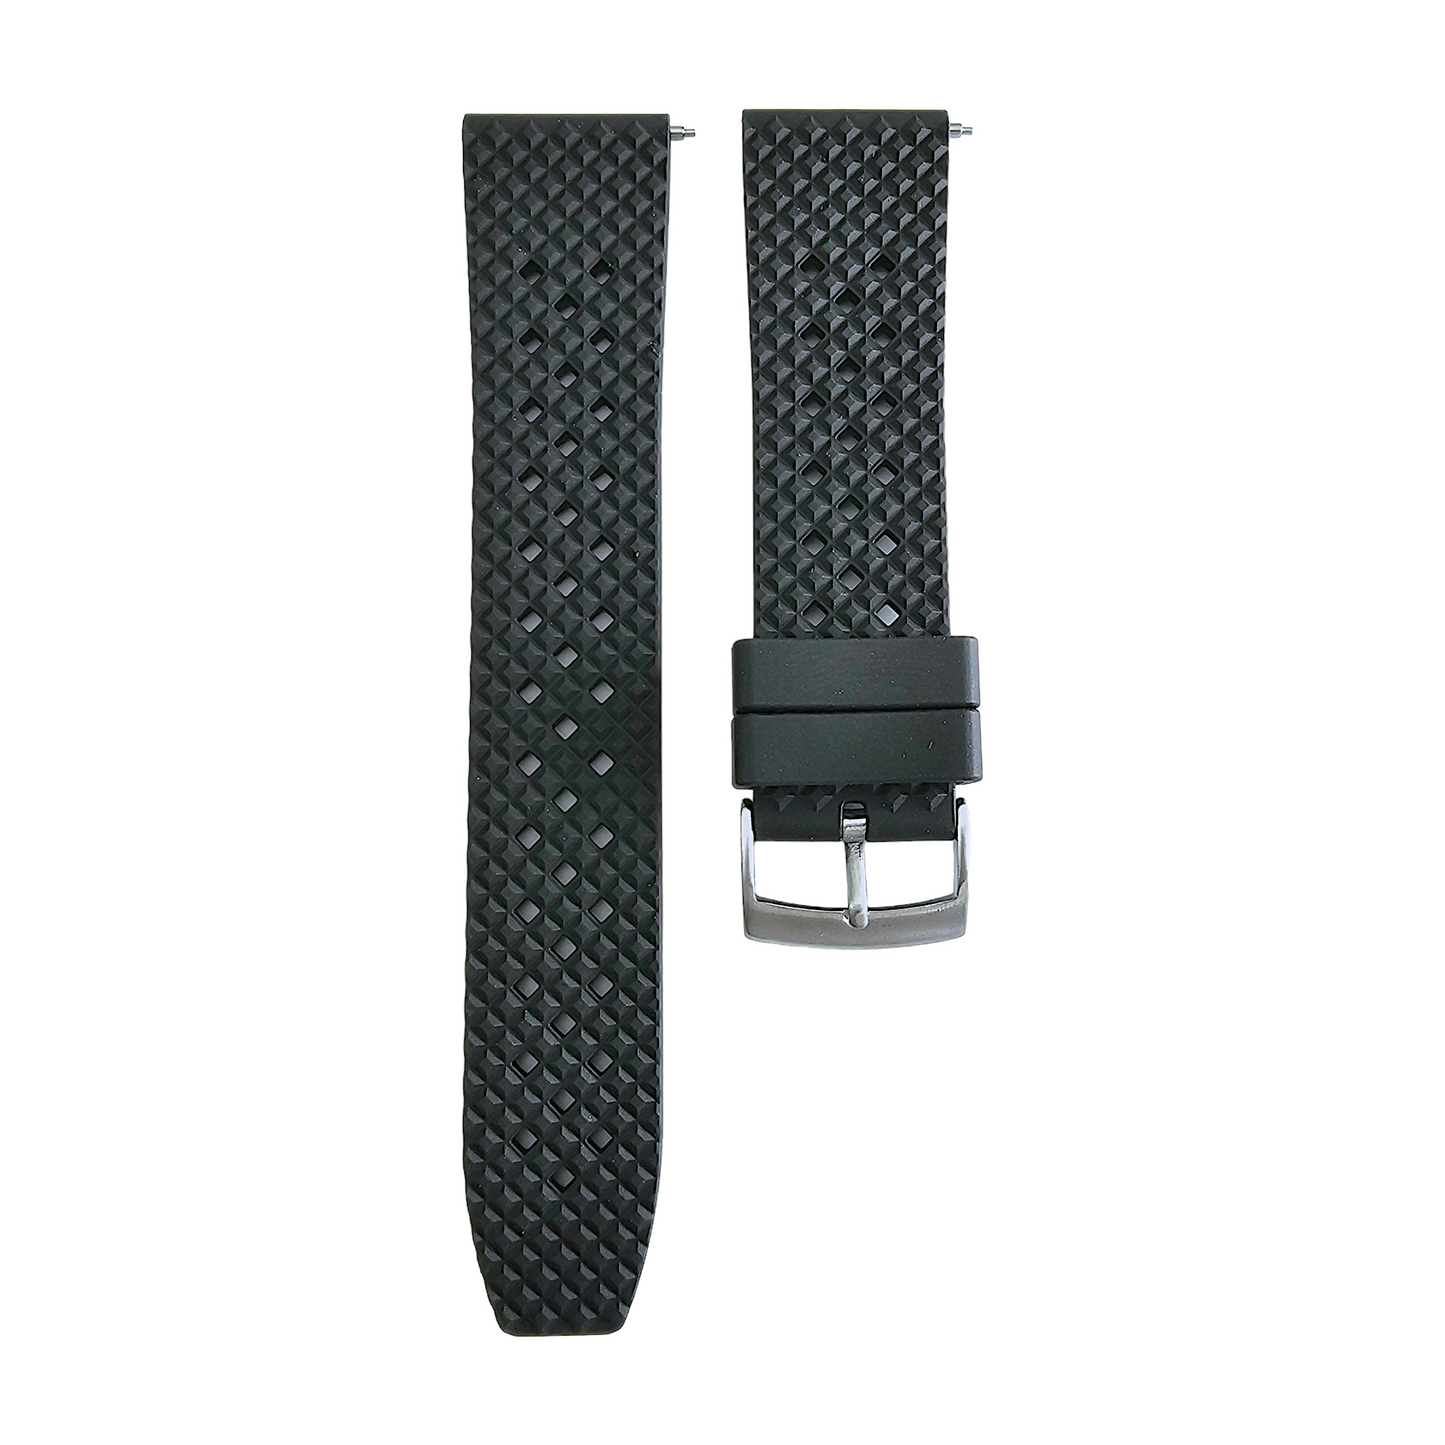 FKM Rubber Honeycomb Divers Watch Strap Band 20mm 22mm Black